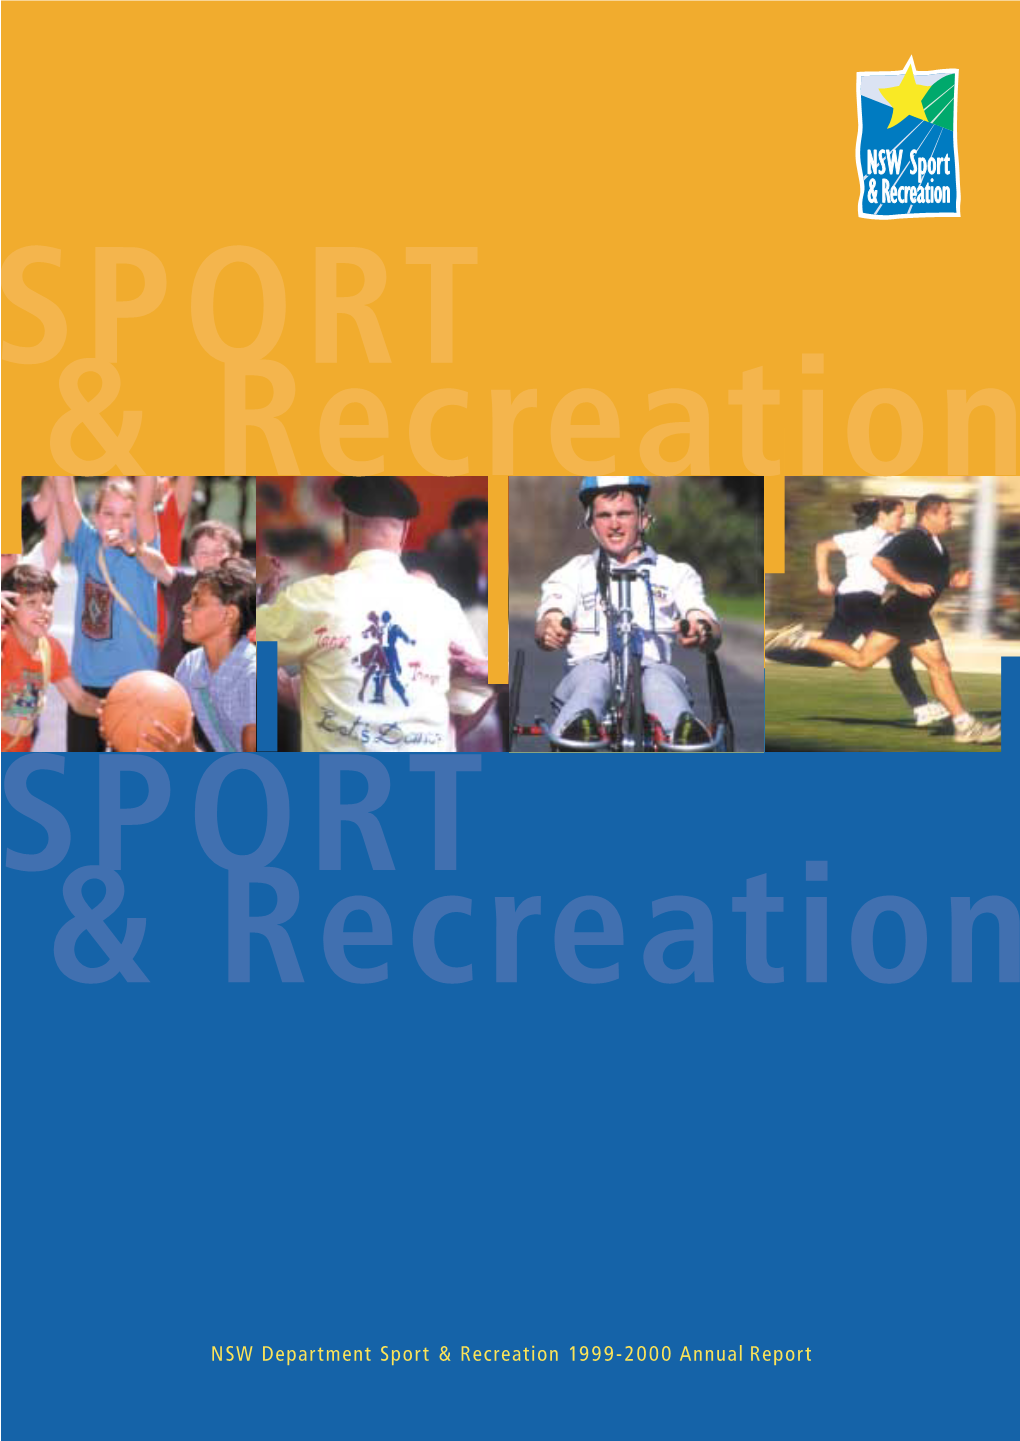 NSW Department of Sport and Recreation Annual